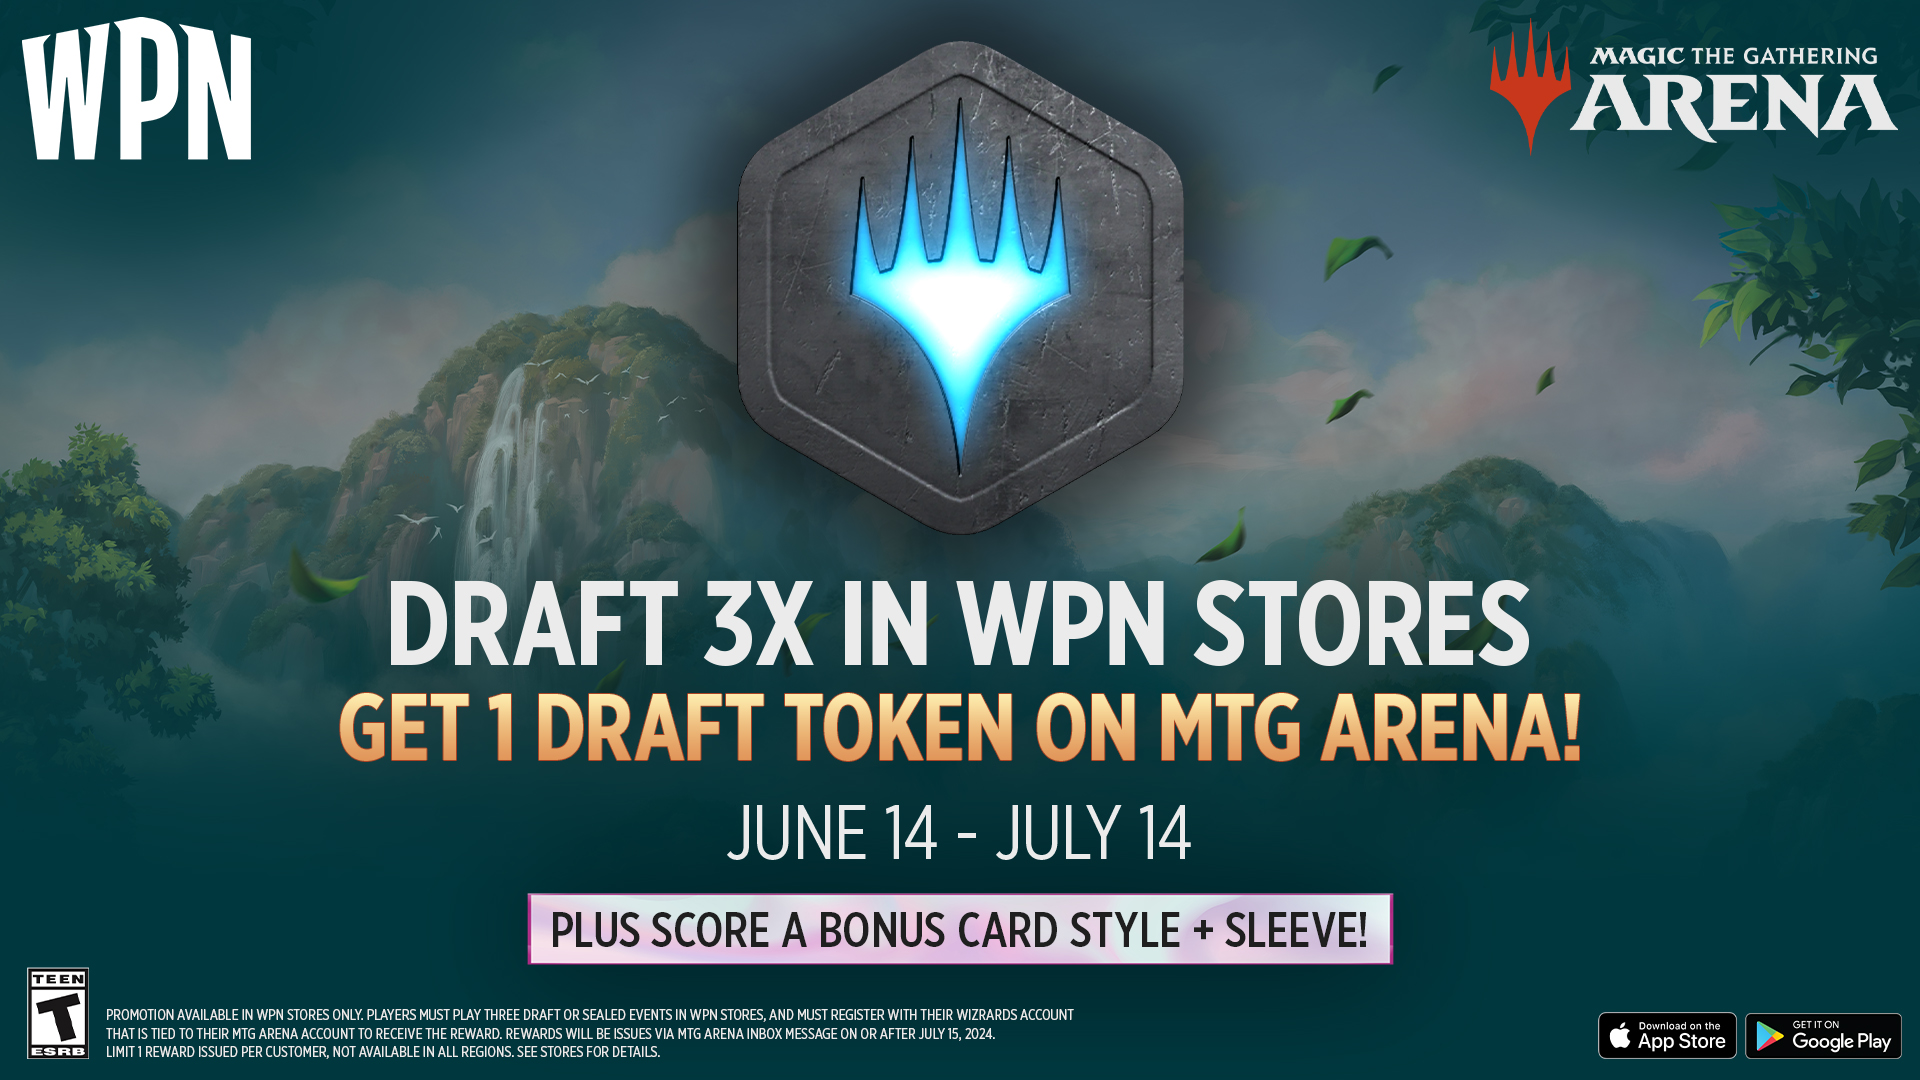 Draft three times in WPN stores, get one Draft token on MTG Arena, June 14–July 14, plus score a bonus card style and sleeve